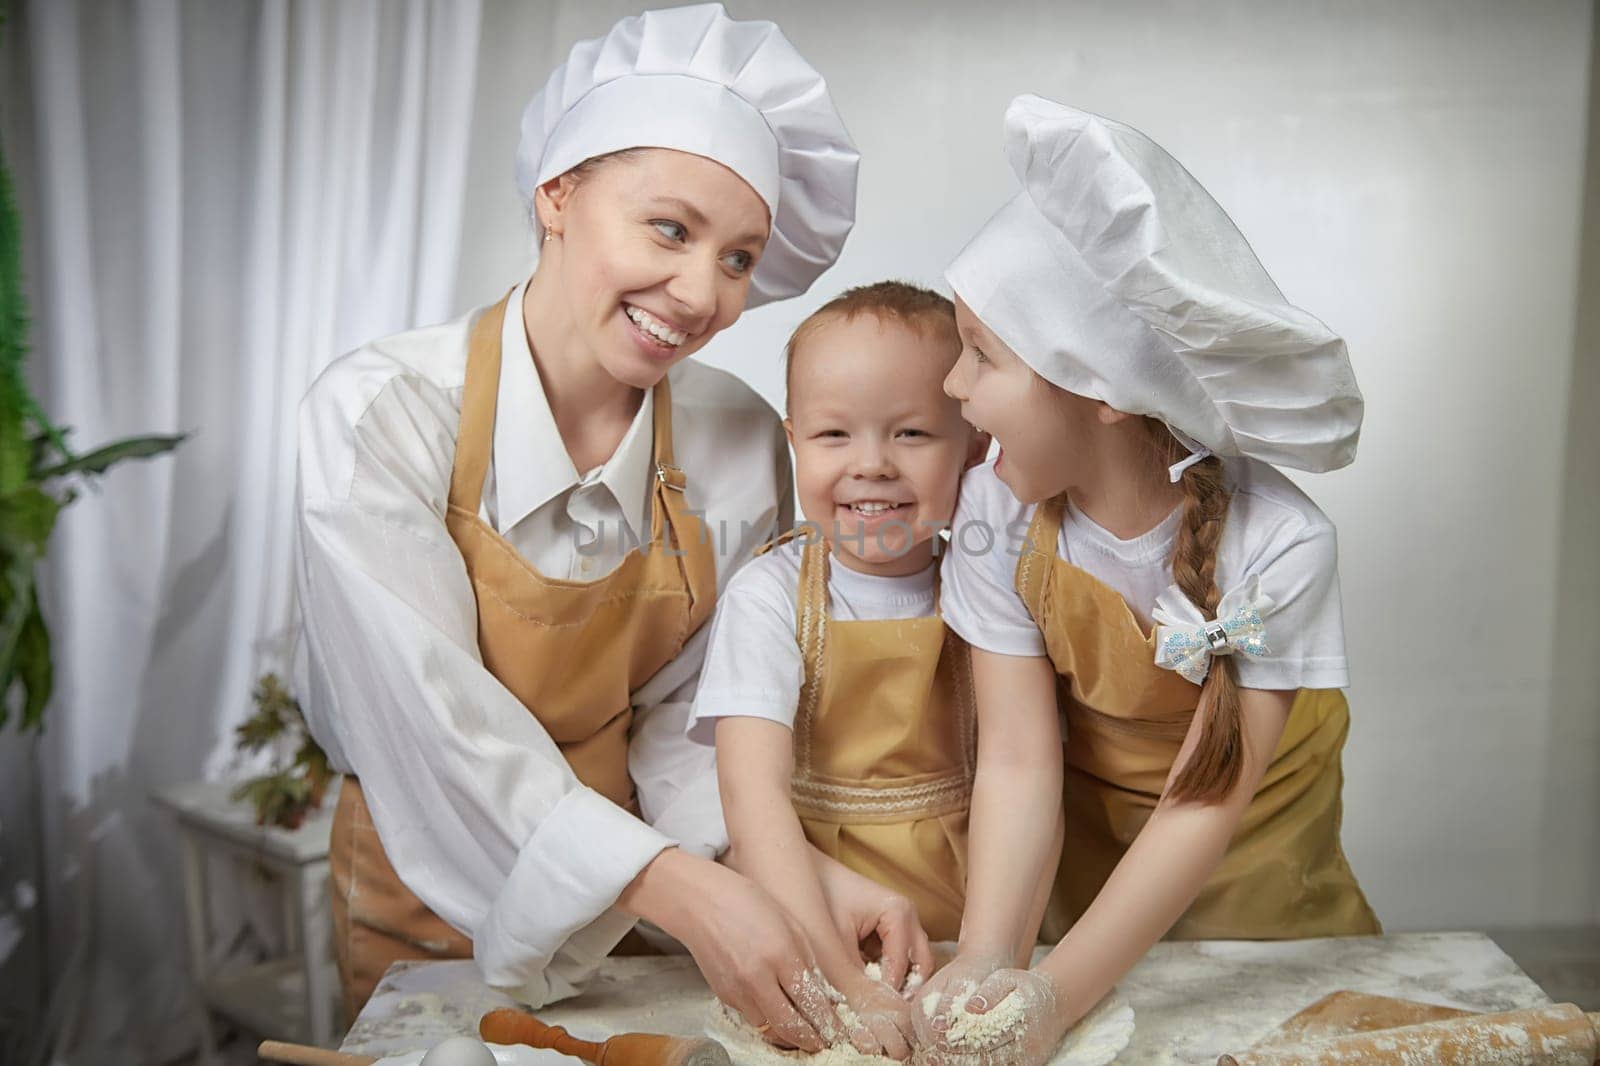 Cute oriental family with mother, daughter, son cooking in the kitchen on Ramadan, Kurban-Bairam, Eid al-Adha. Funny family at cook photo shoot. Pancakes, Maslenitsa, Easter by keleny